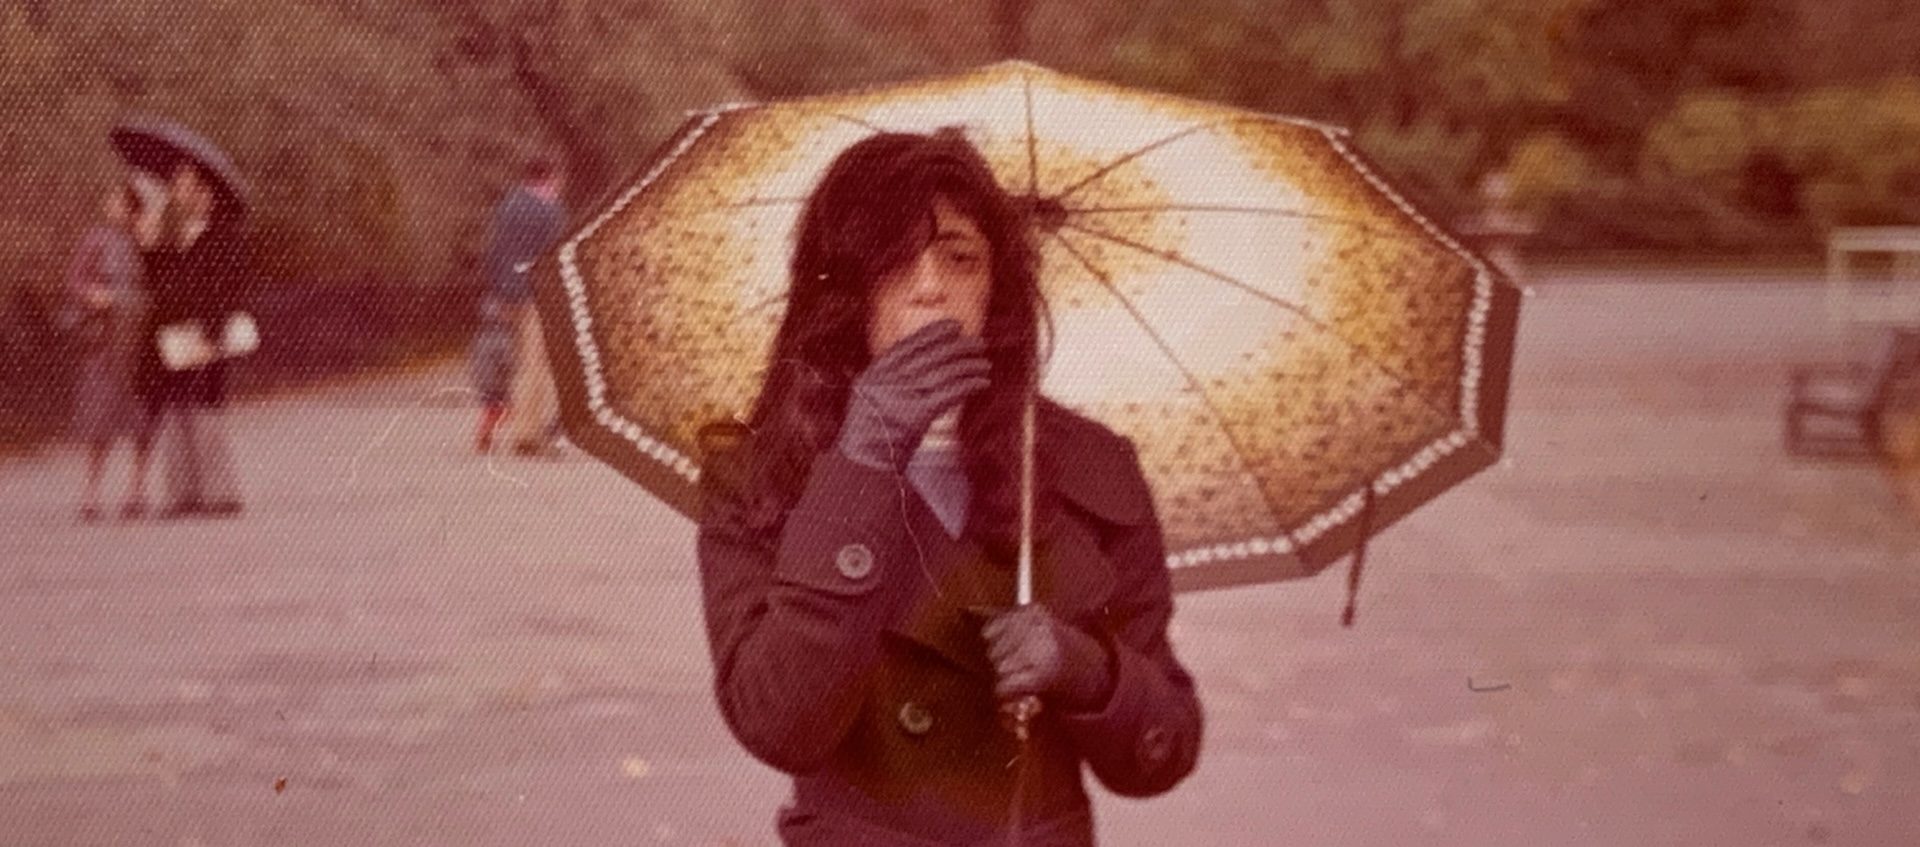 A person with long dark hair stands outdoors under an umbrella. Their gloved hand partially covers their face.